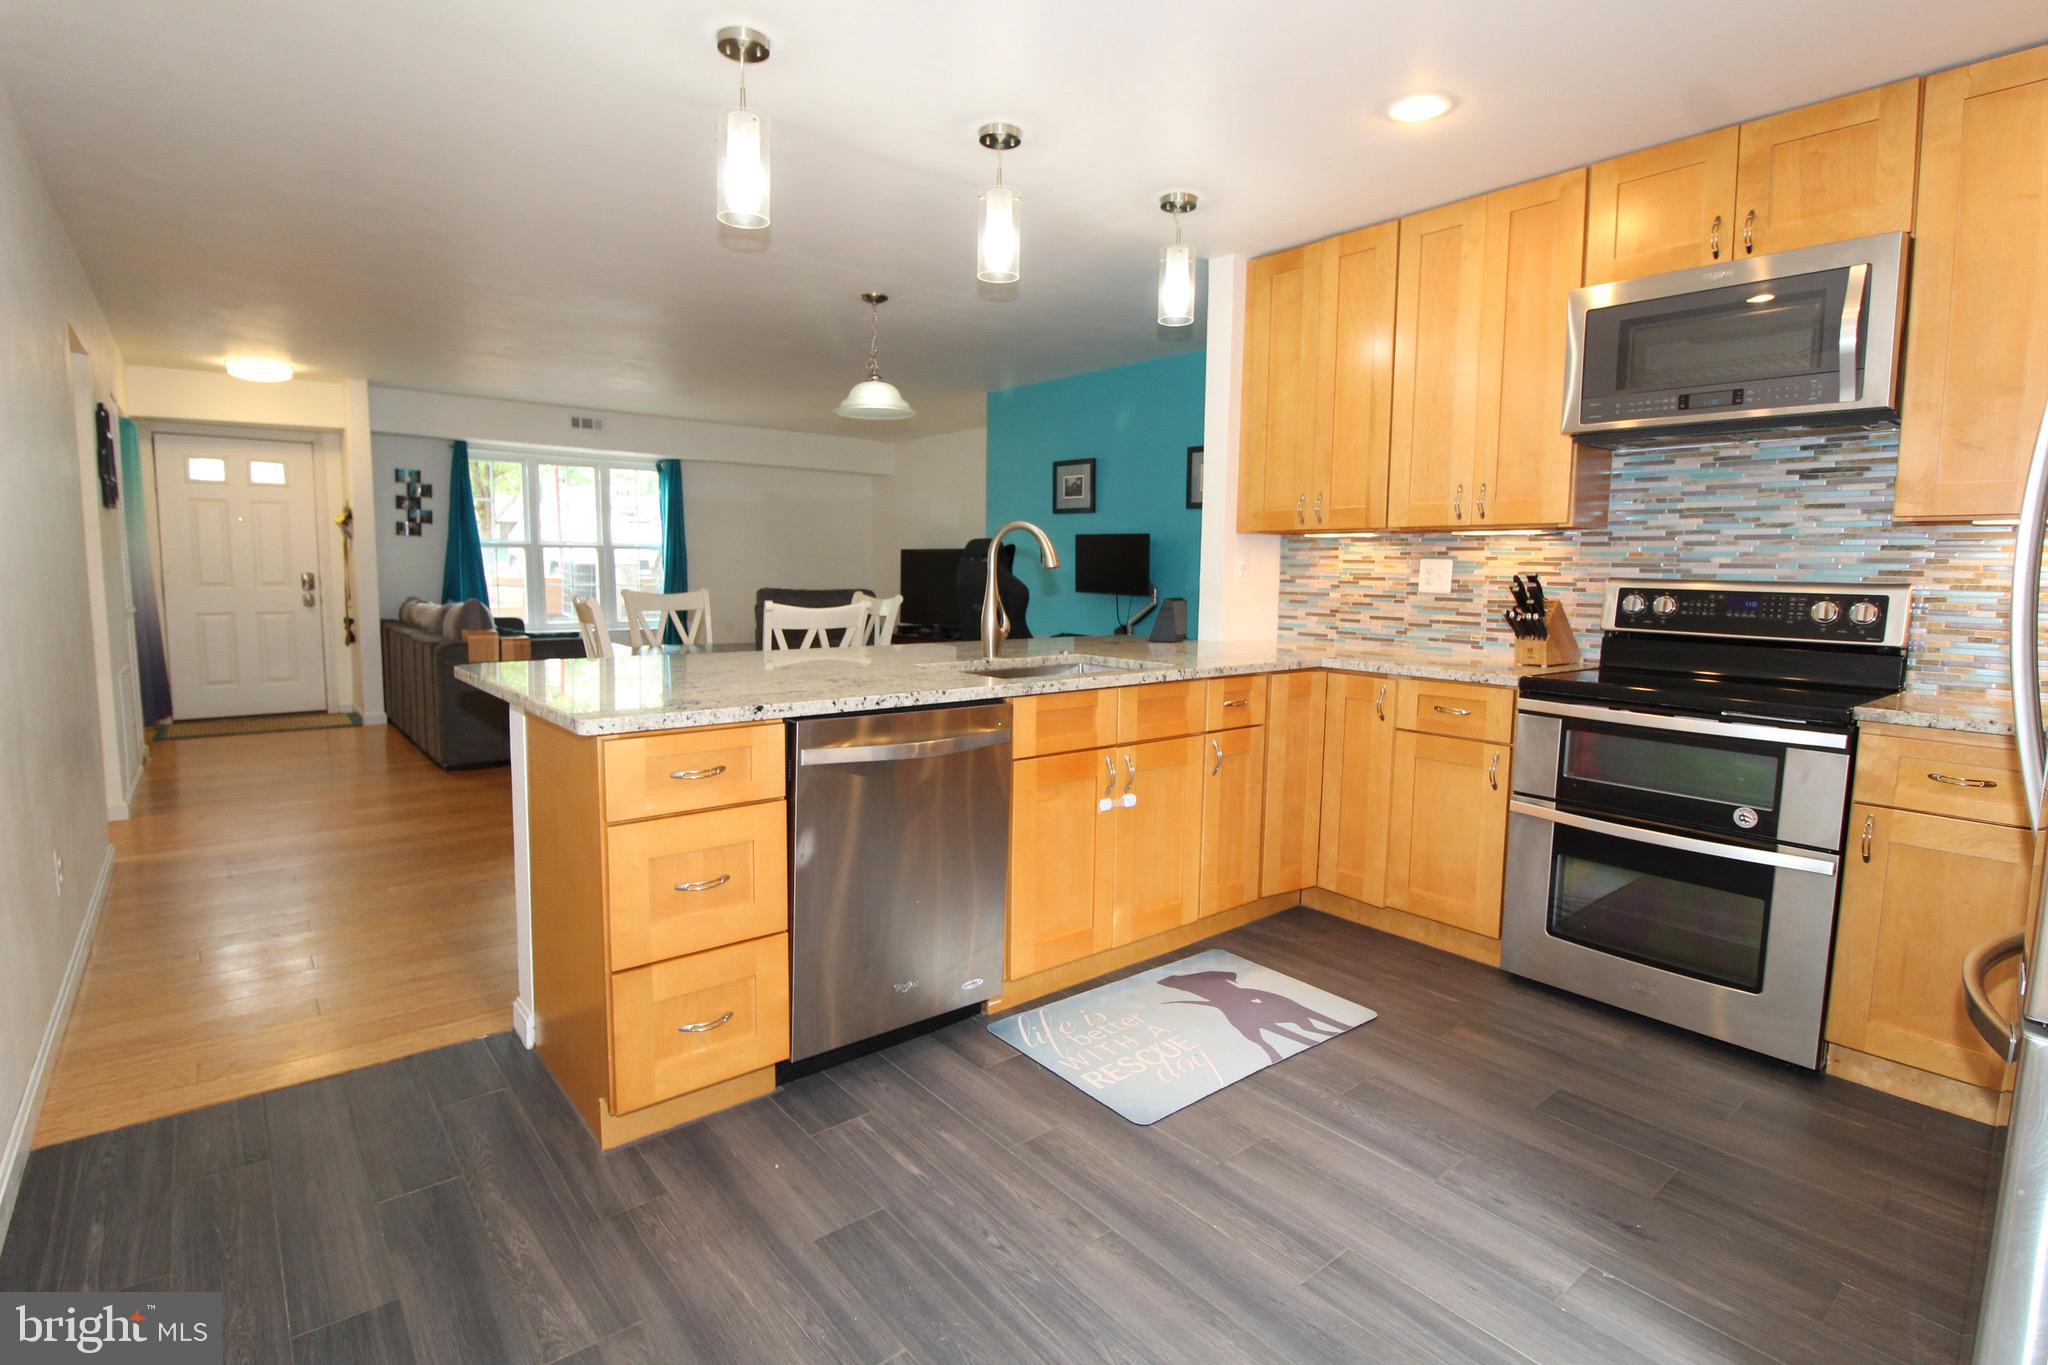 a kitchen with stainless steel appliances granite countertop a sink cabinets and wooden floor